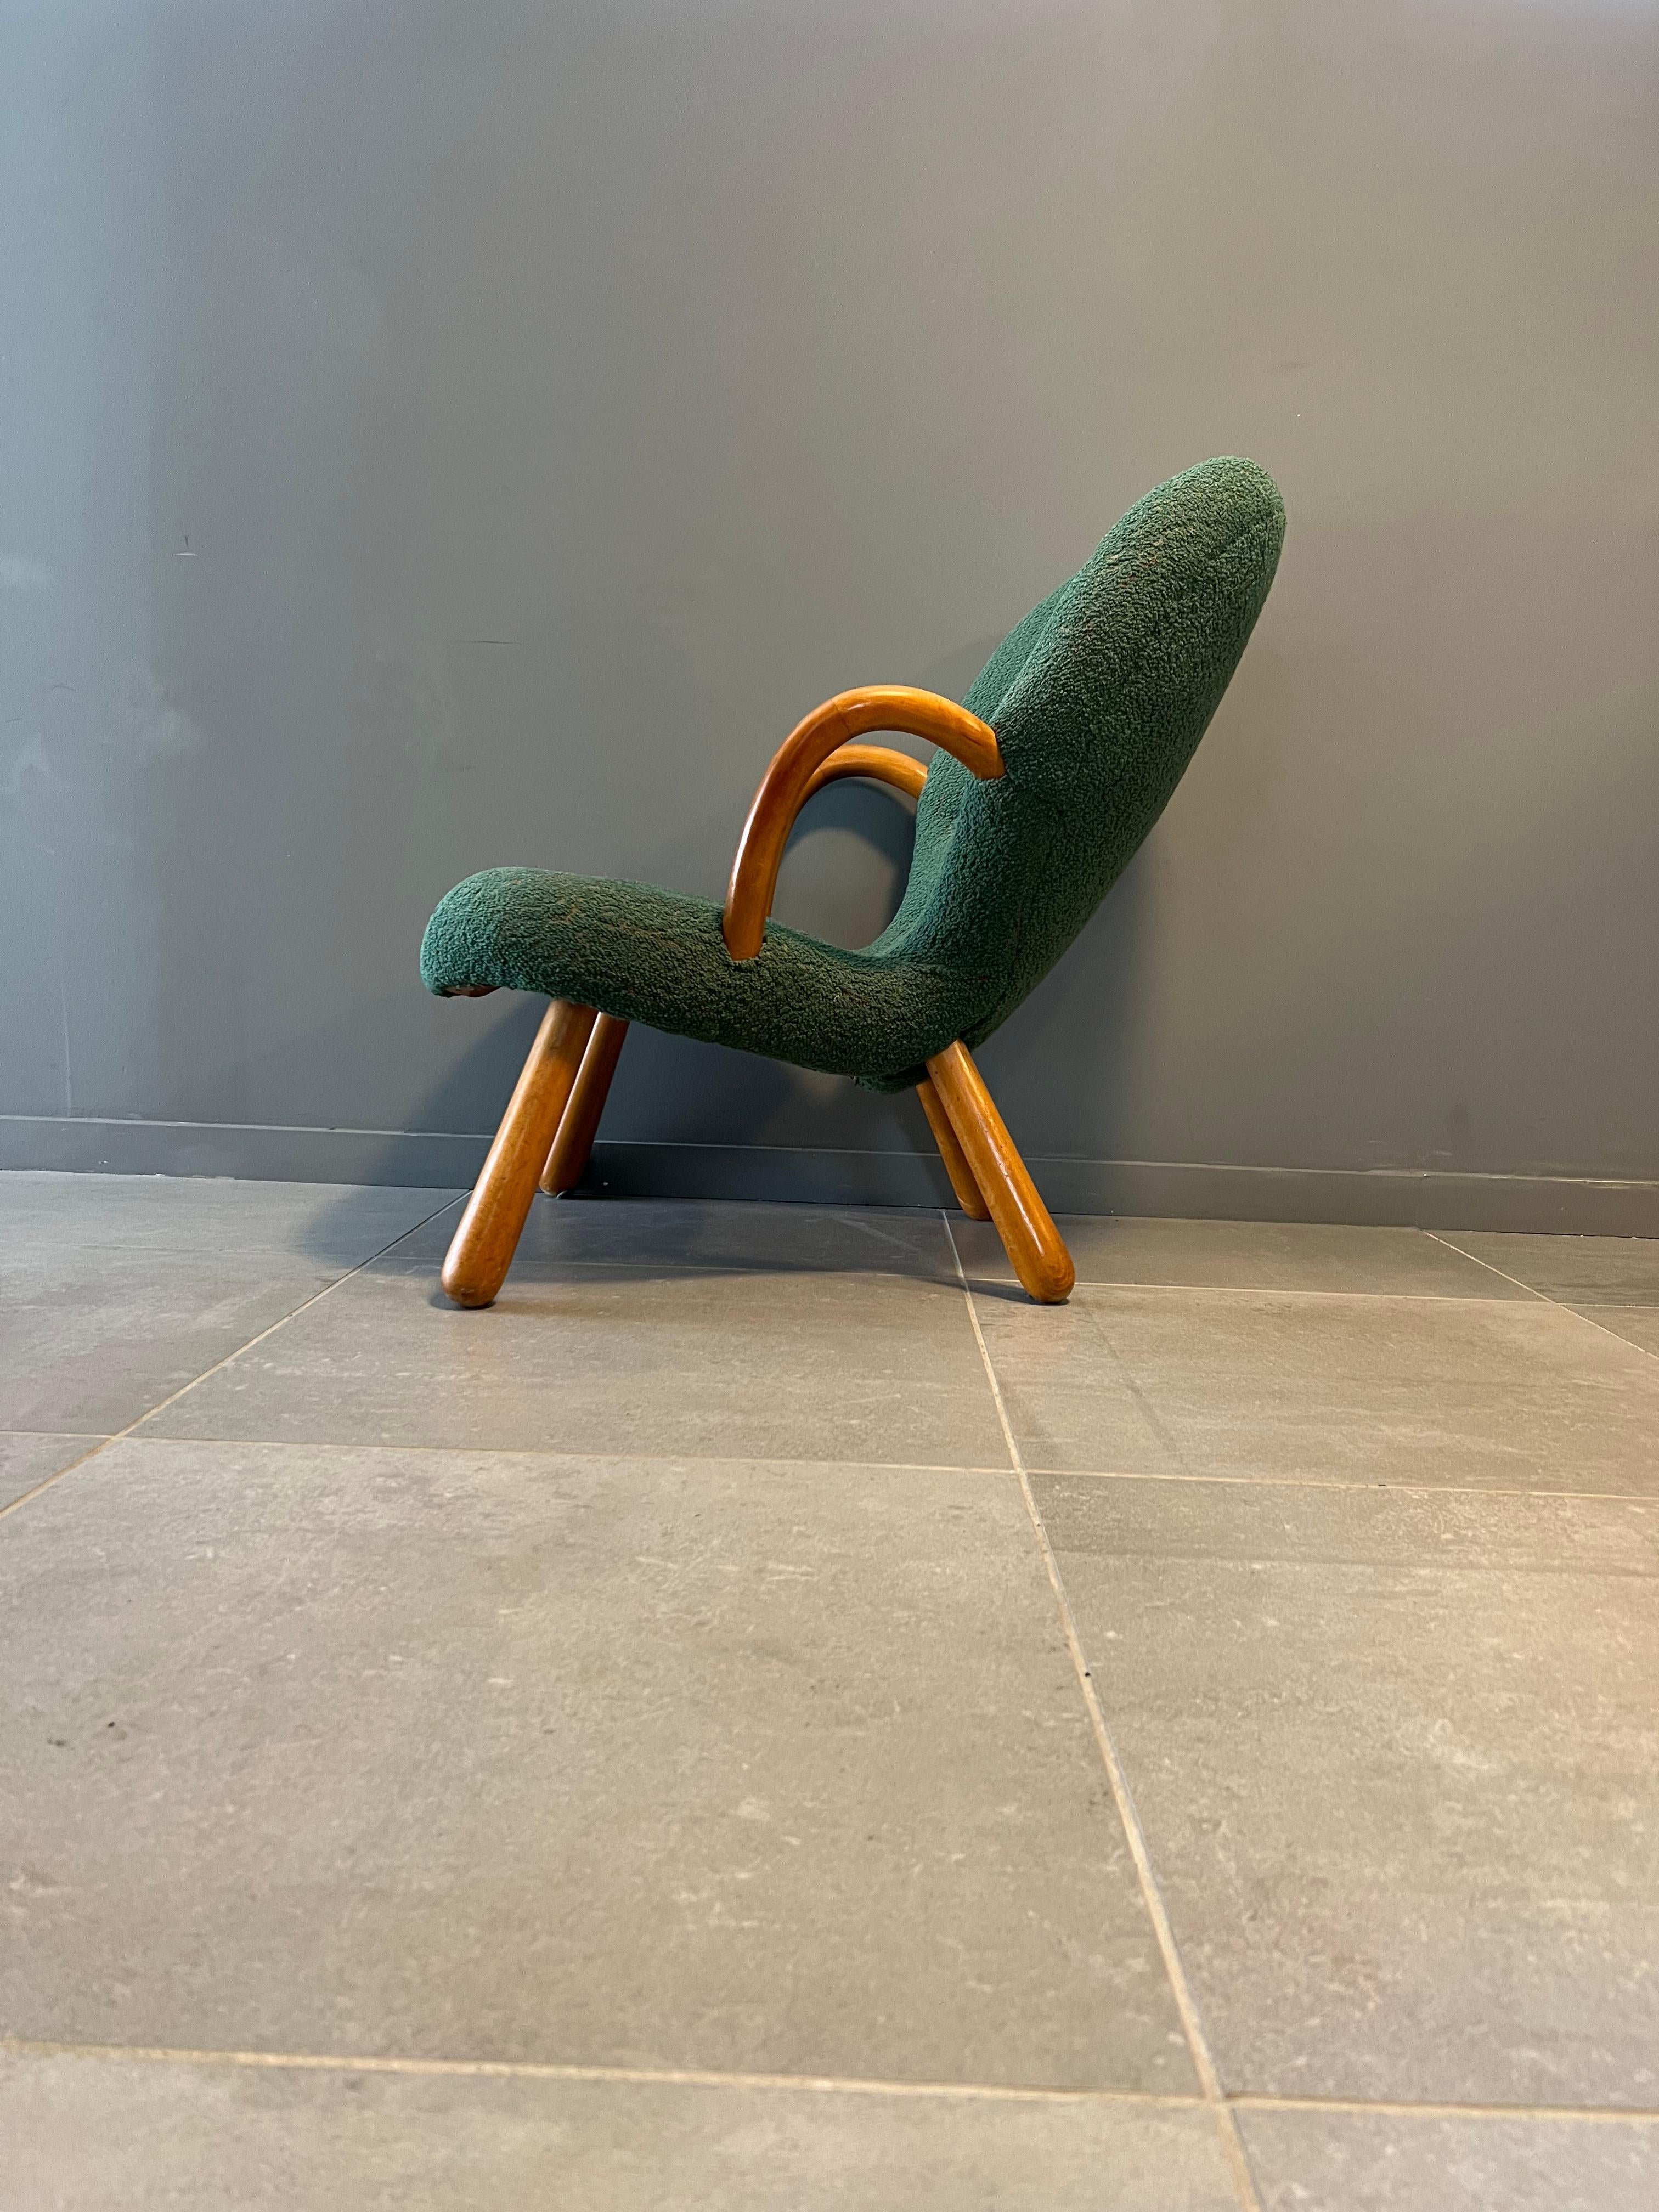 This gives you a very special and once in a life time opportunity. 
This Clam Chair is not only all original but even got the Vik & Blindheim batch. 
A design with a rather perplexing, yet fascinating history, it has been attributed to several